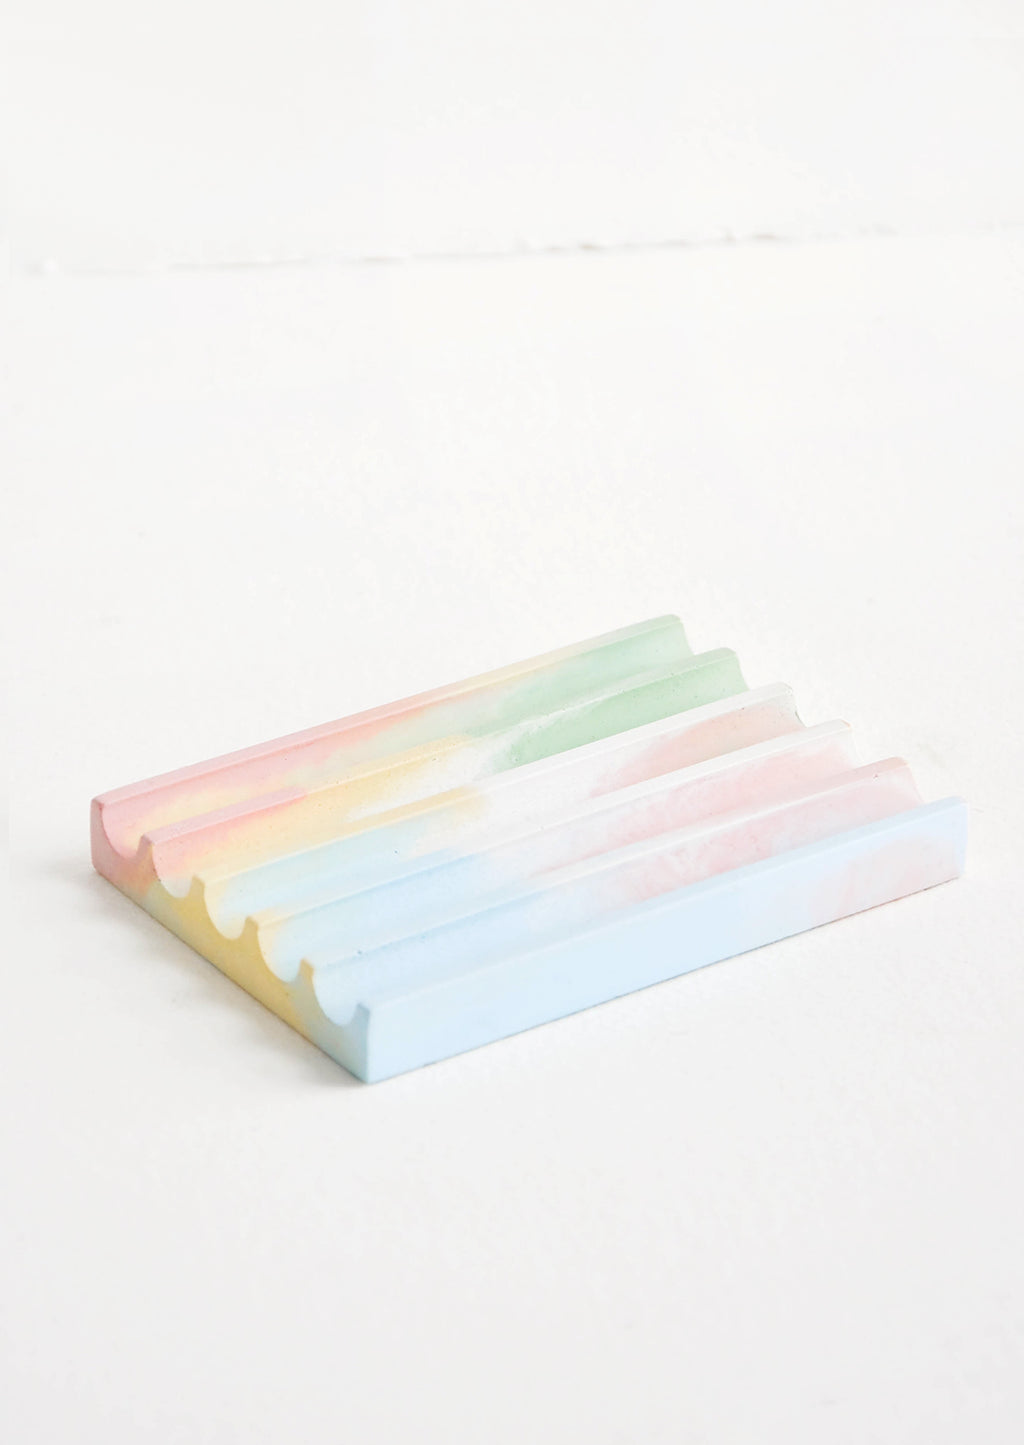 Rainbow: A marbled pink, yellow, blue, and green smooth concrete soap dish with troughs and ridges.